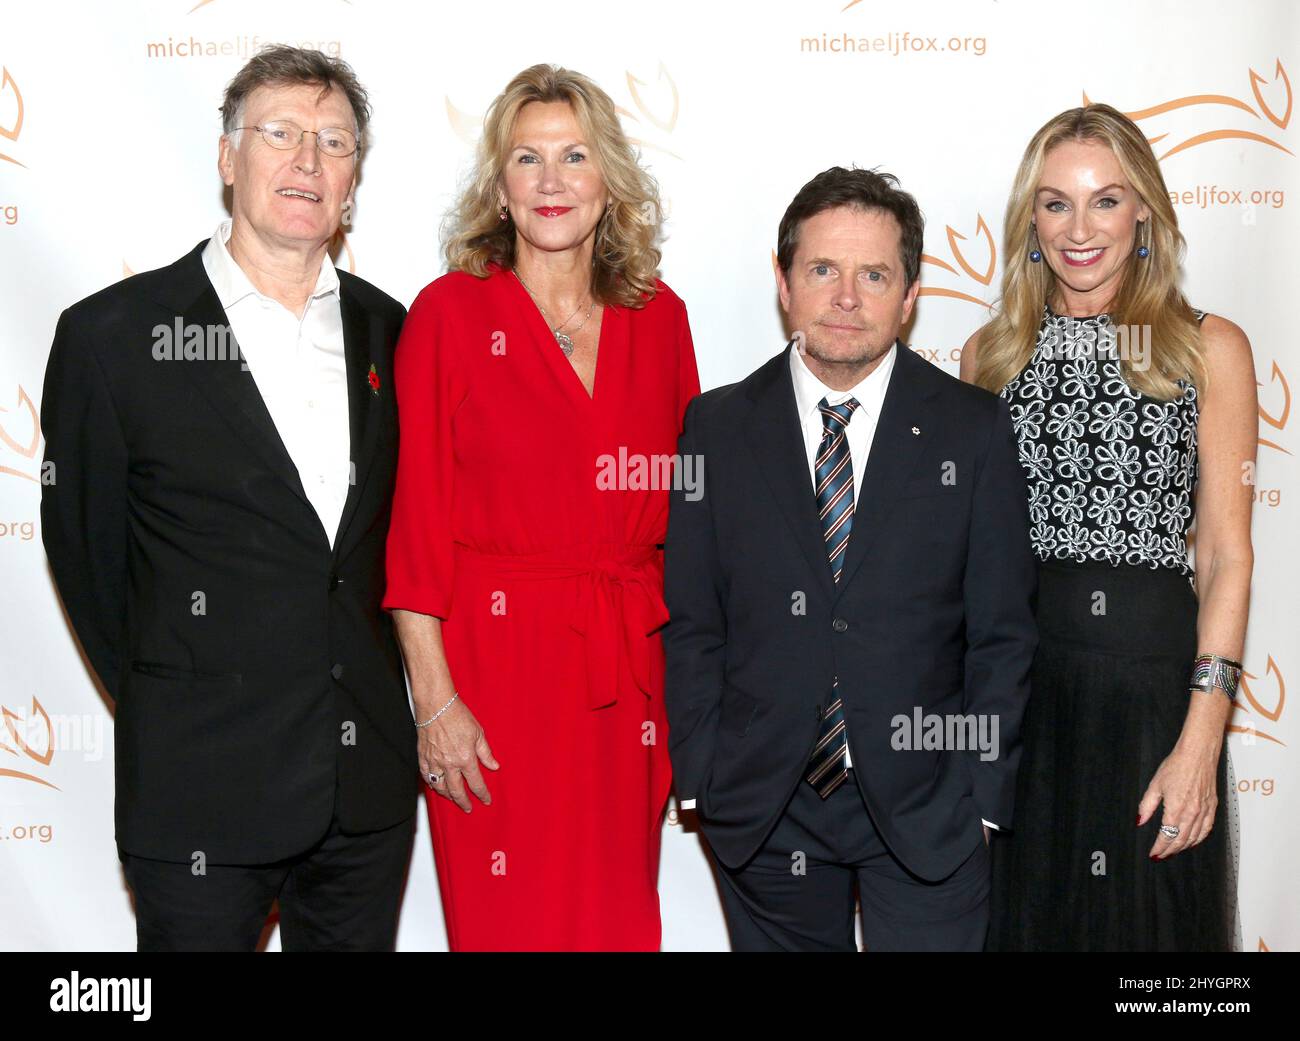 Steve Winwood, wife Eugenia Winwood, Michael J. Fox & Tracy Pollan at A Funny Thing Happened on the Way to Cure Parkinson's held at the Hilton New York on November 10, 2018 in New York City, NY Stock Photo